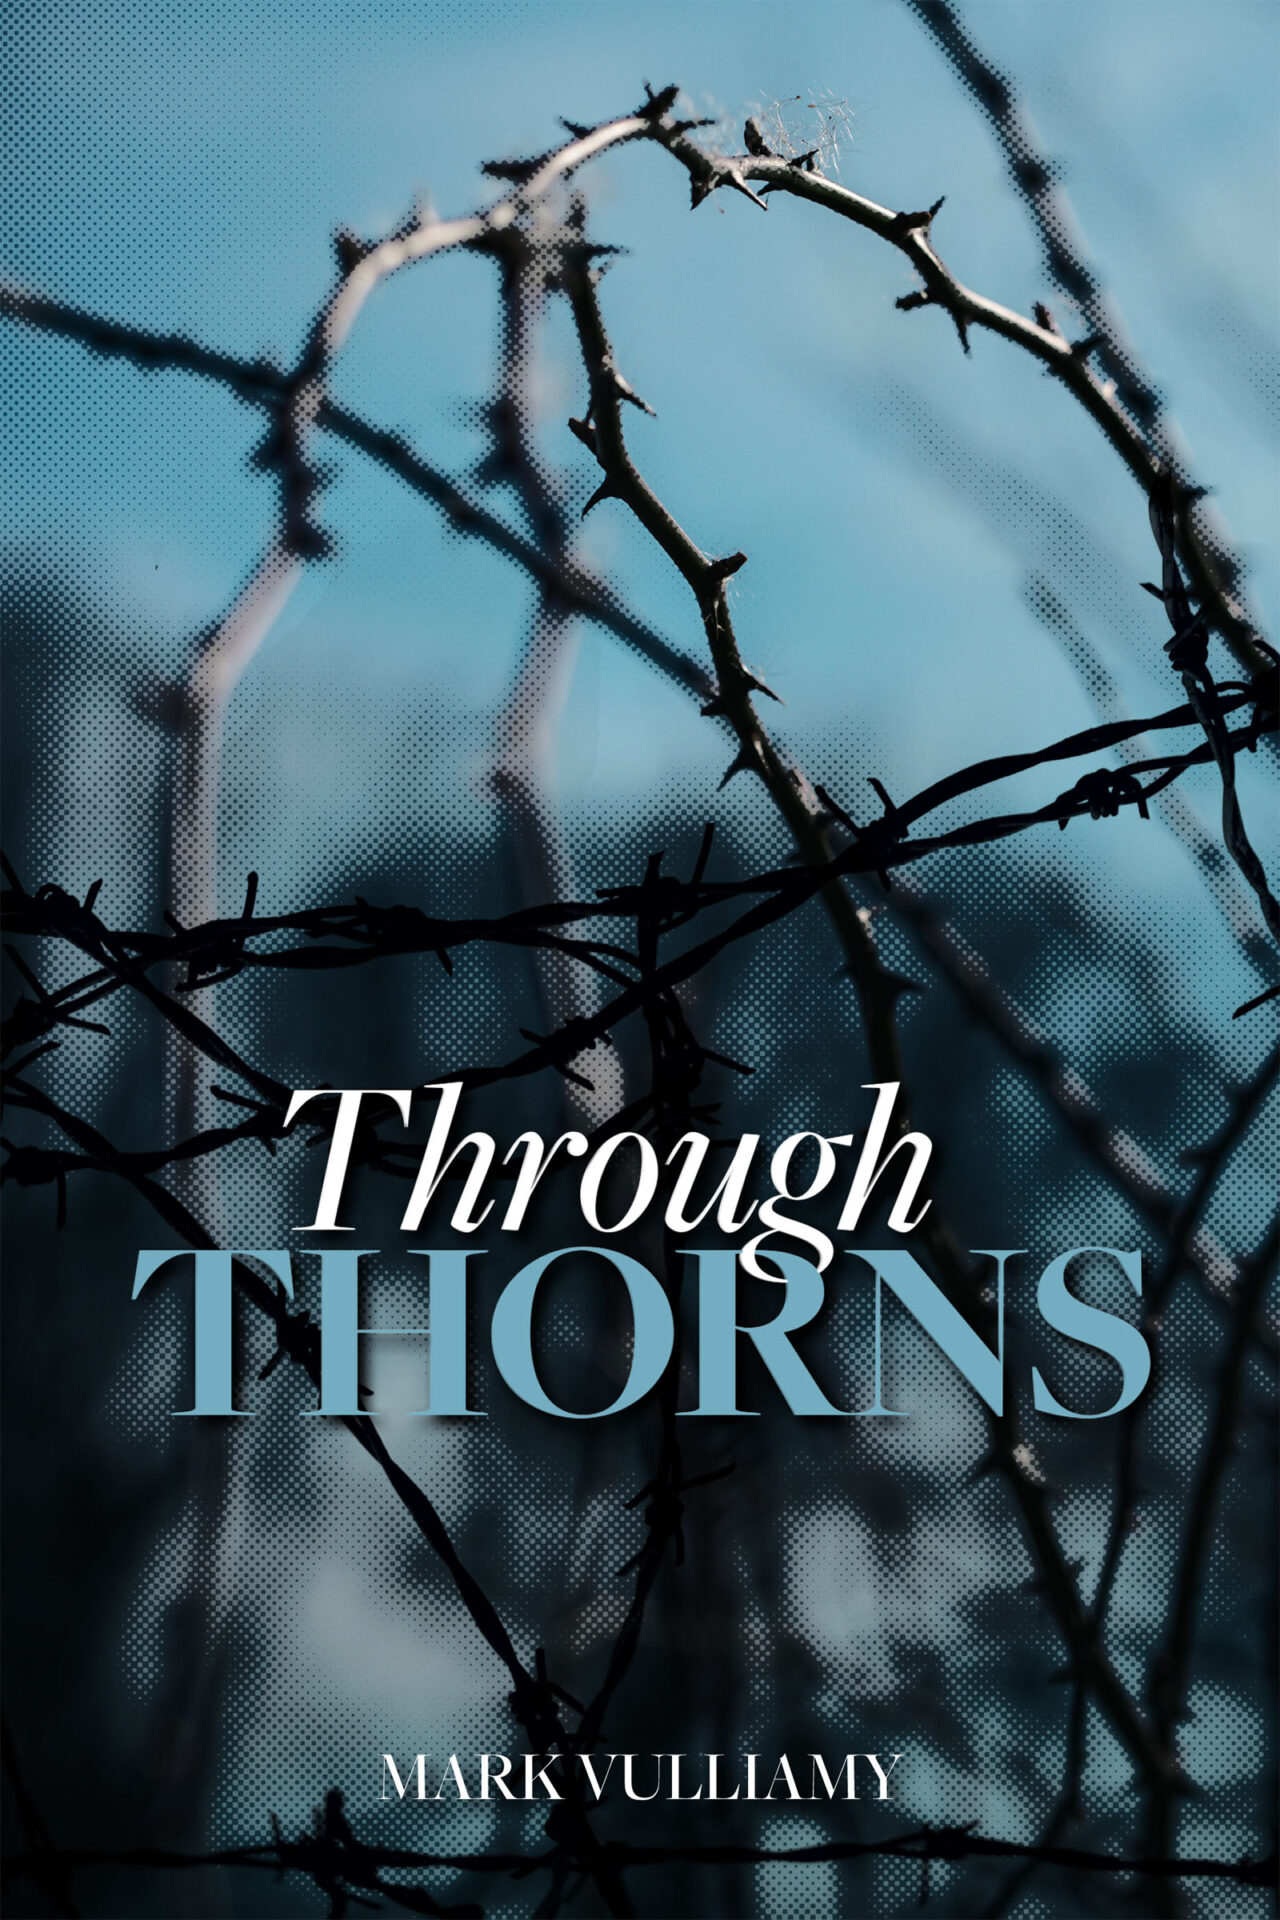 The Three Thorns by Michael Gibney